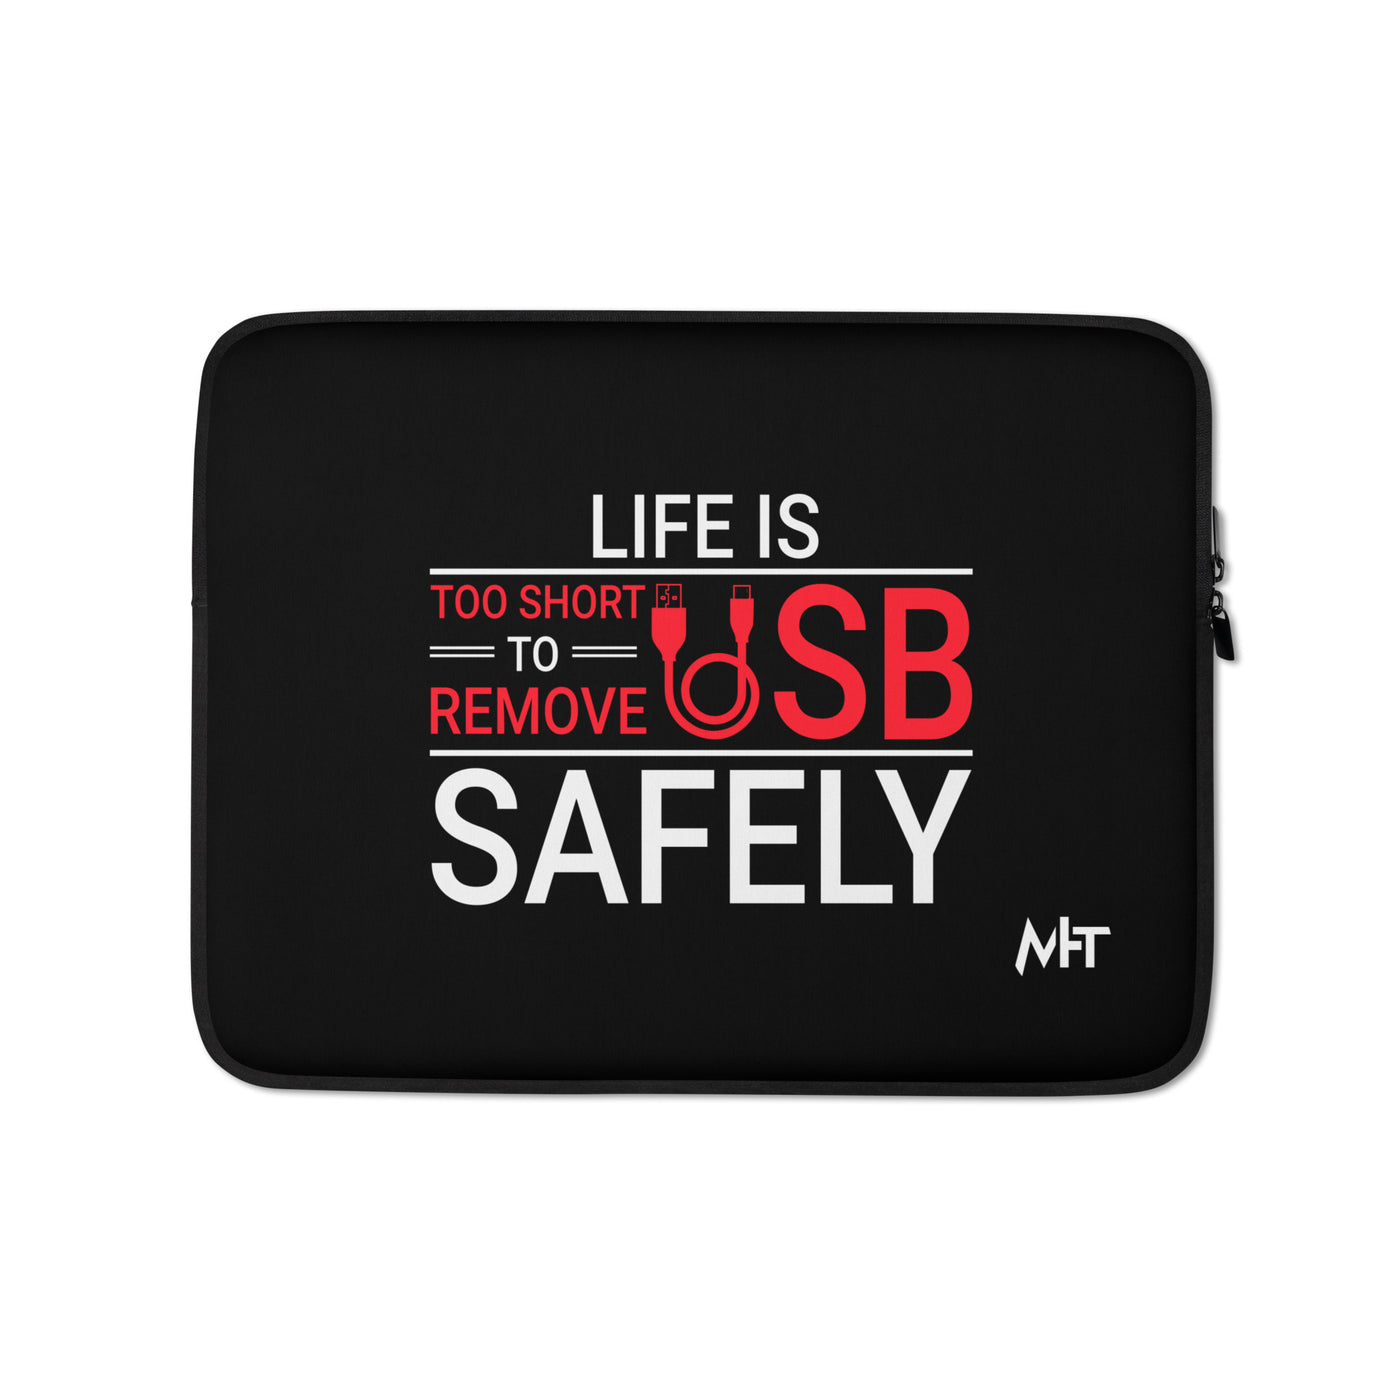 Life is too Short to Remove USB Safely - Laptop Sleeve